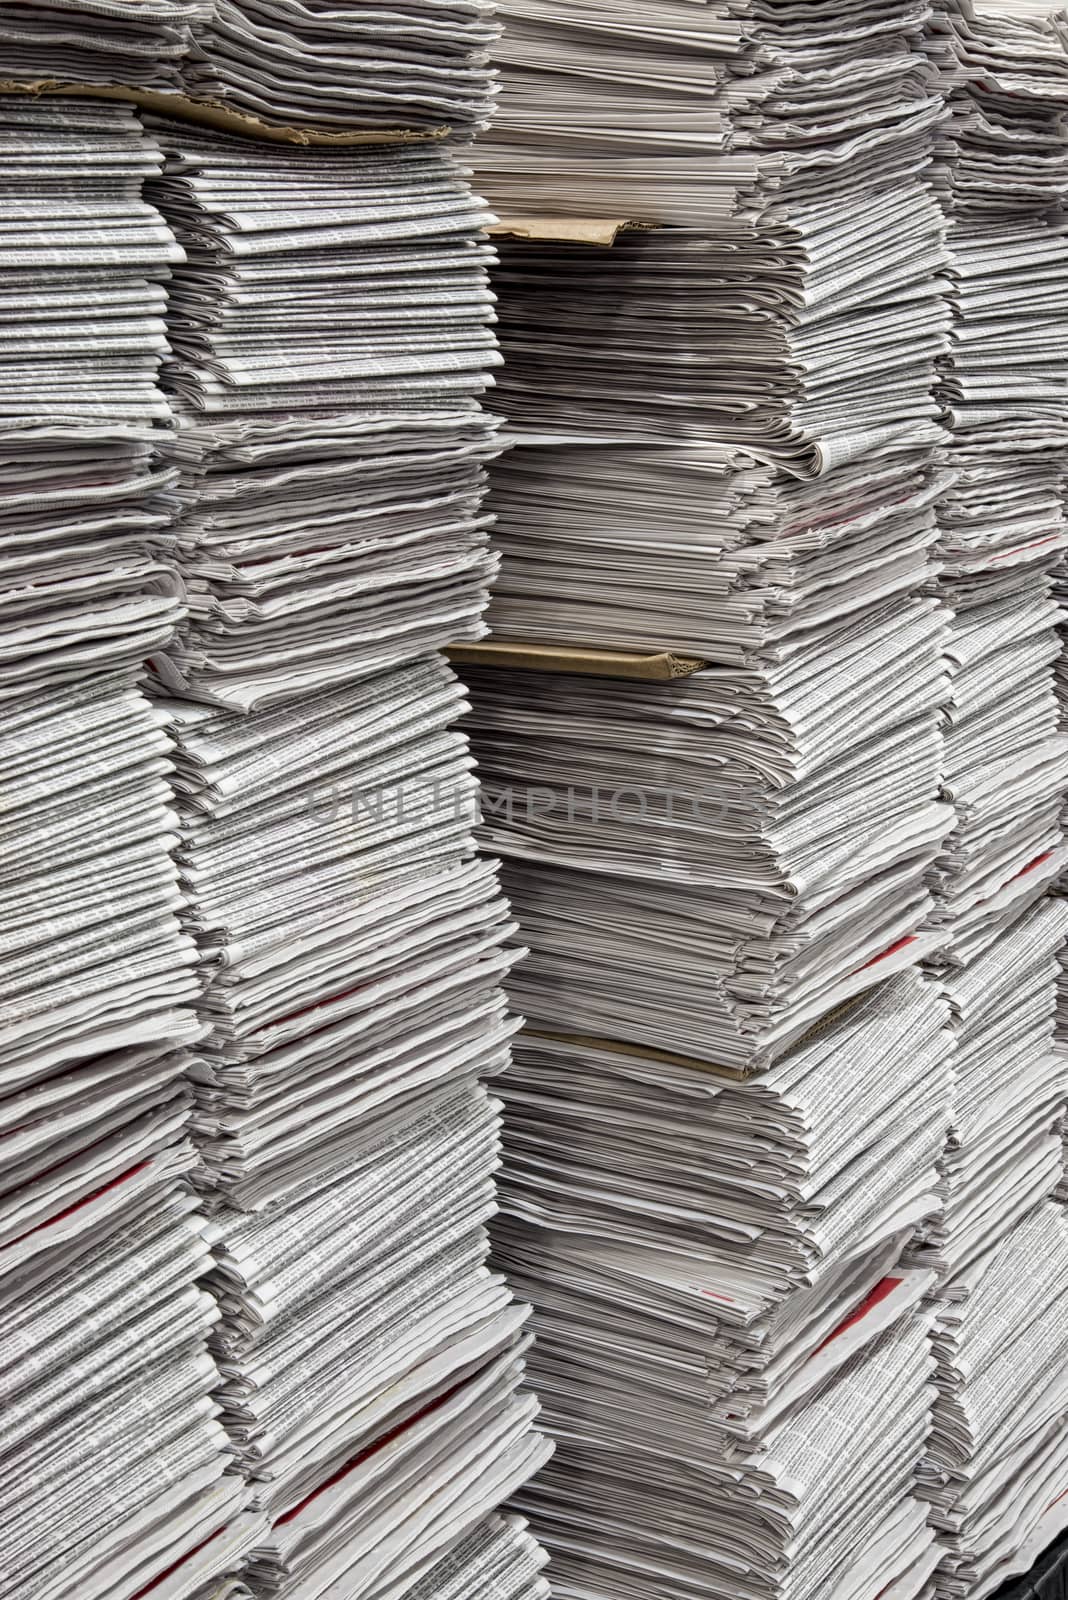 Vertical Stacks Of Newspapers At Warehouse by stockbuster1